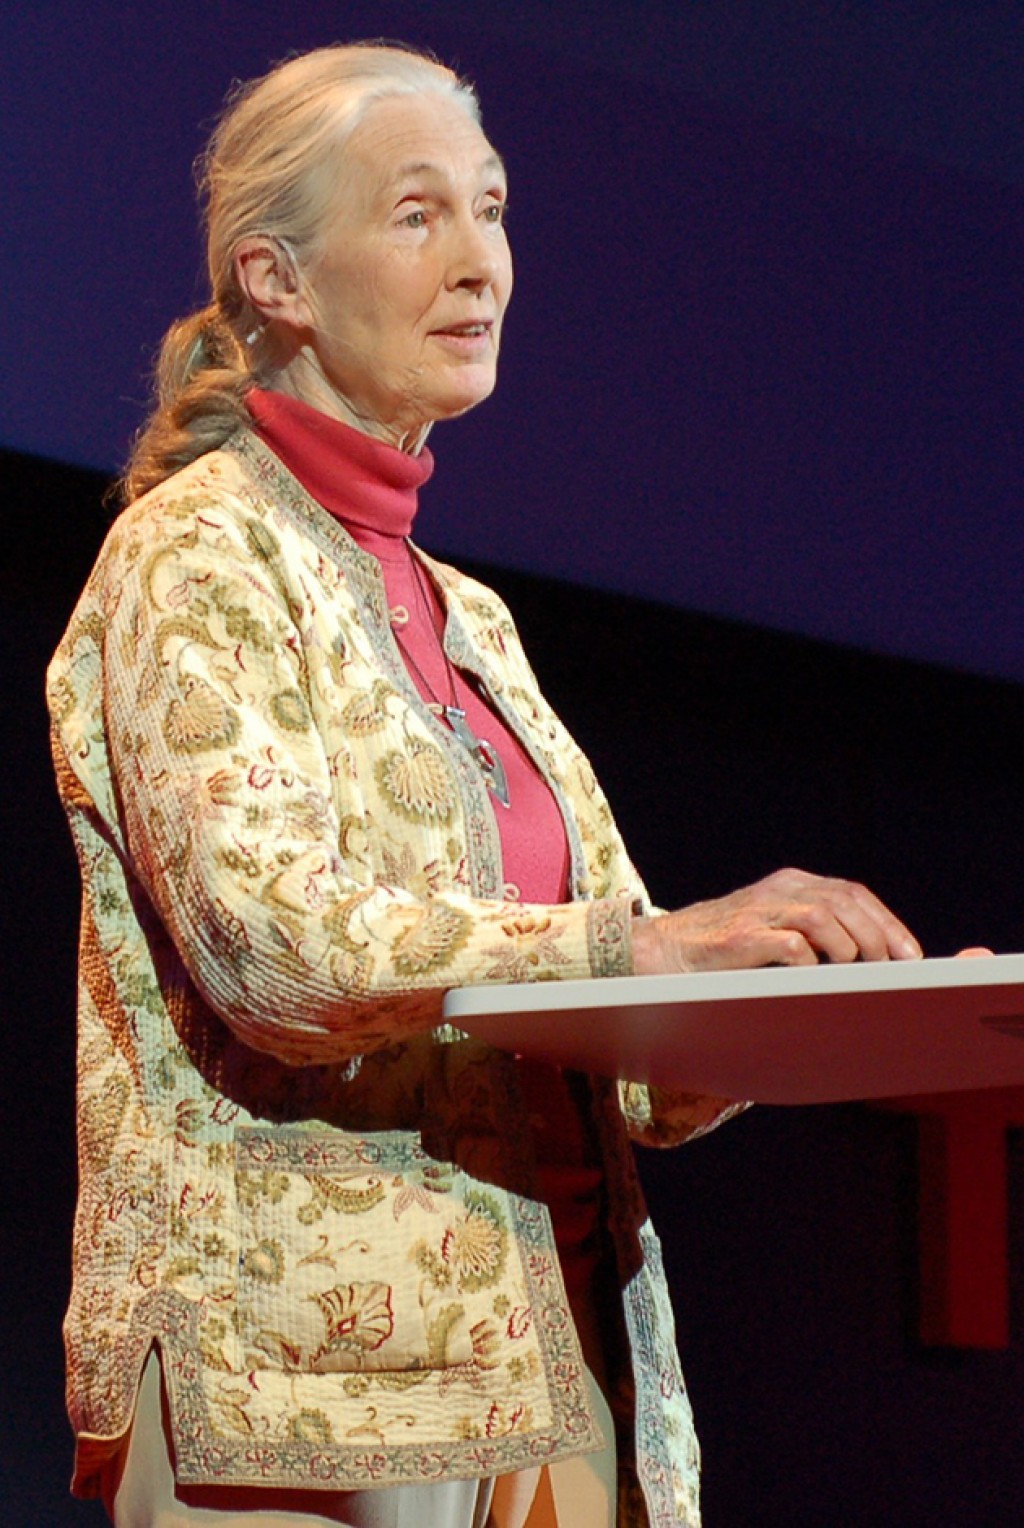 Jane Goodall to talk at Sun Dome